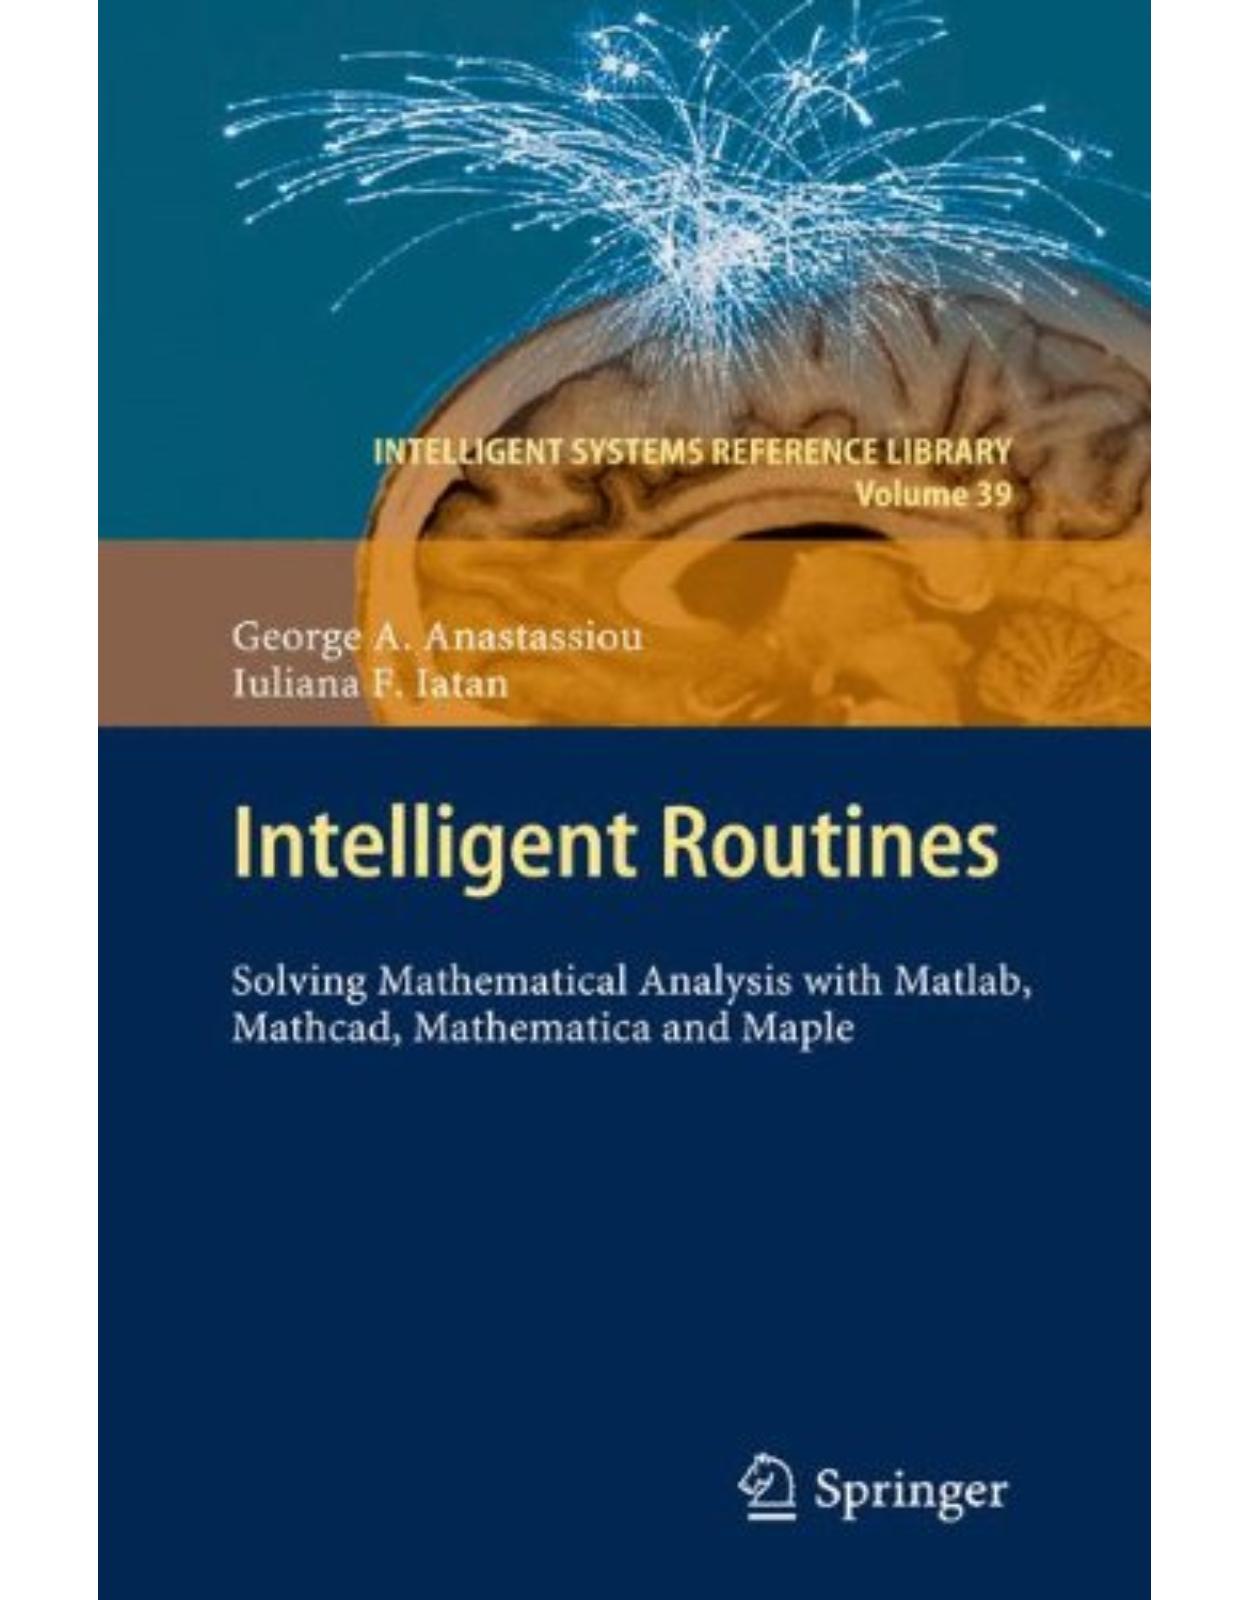 Intelligent Routines: Solving Mathematical Analysis with MATLAB, MathCAD, Mathematica and Maple 